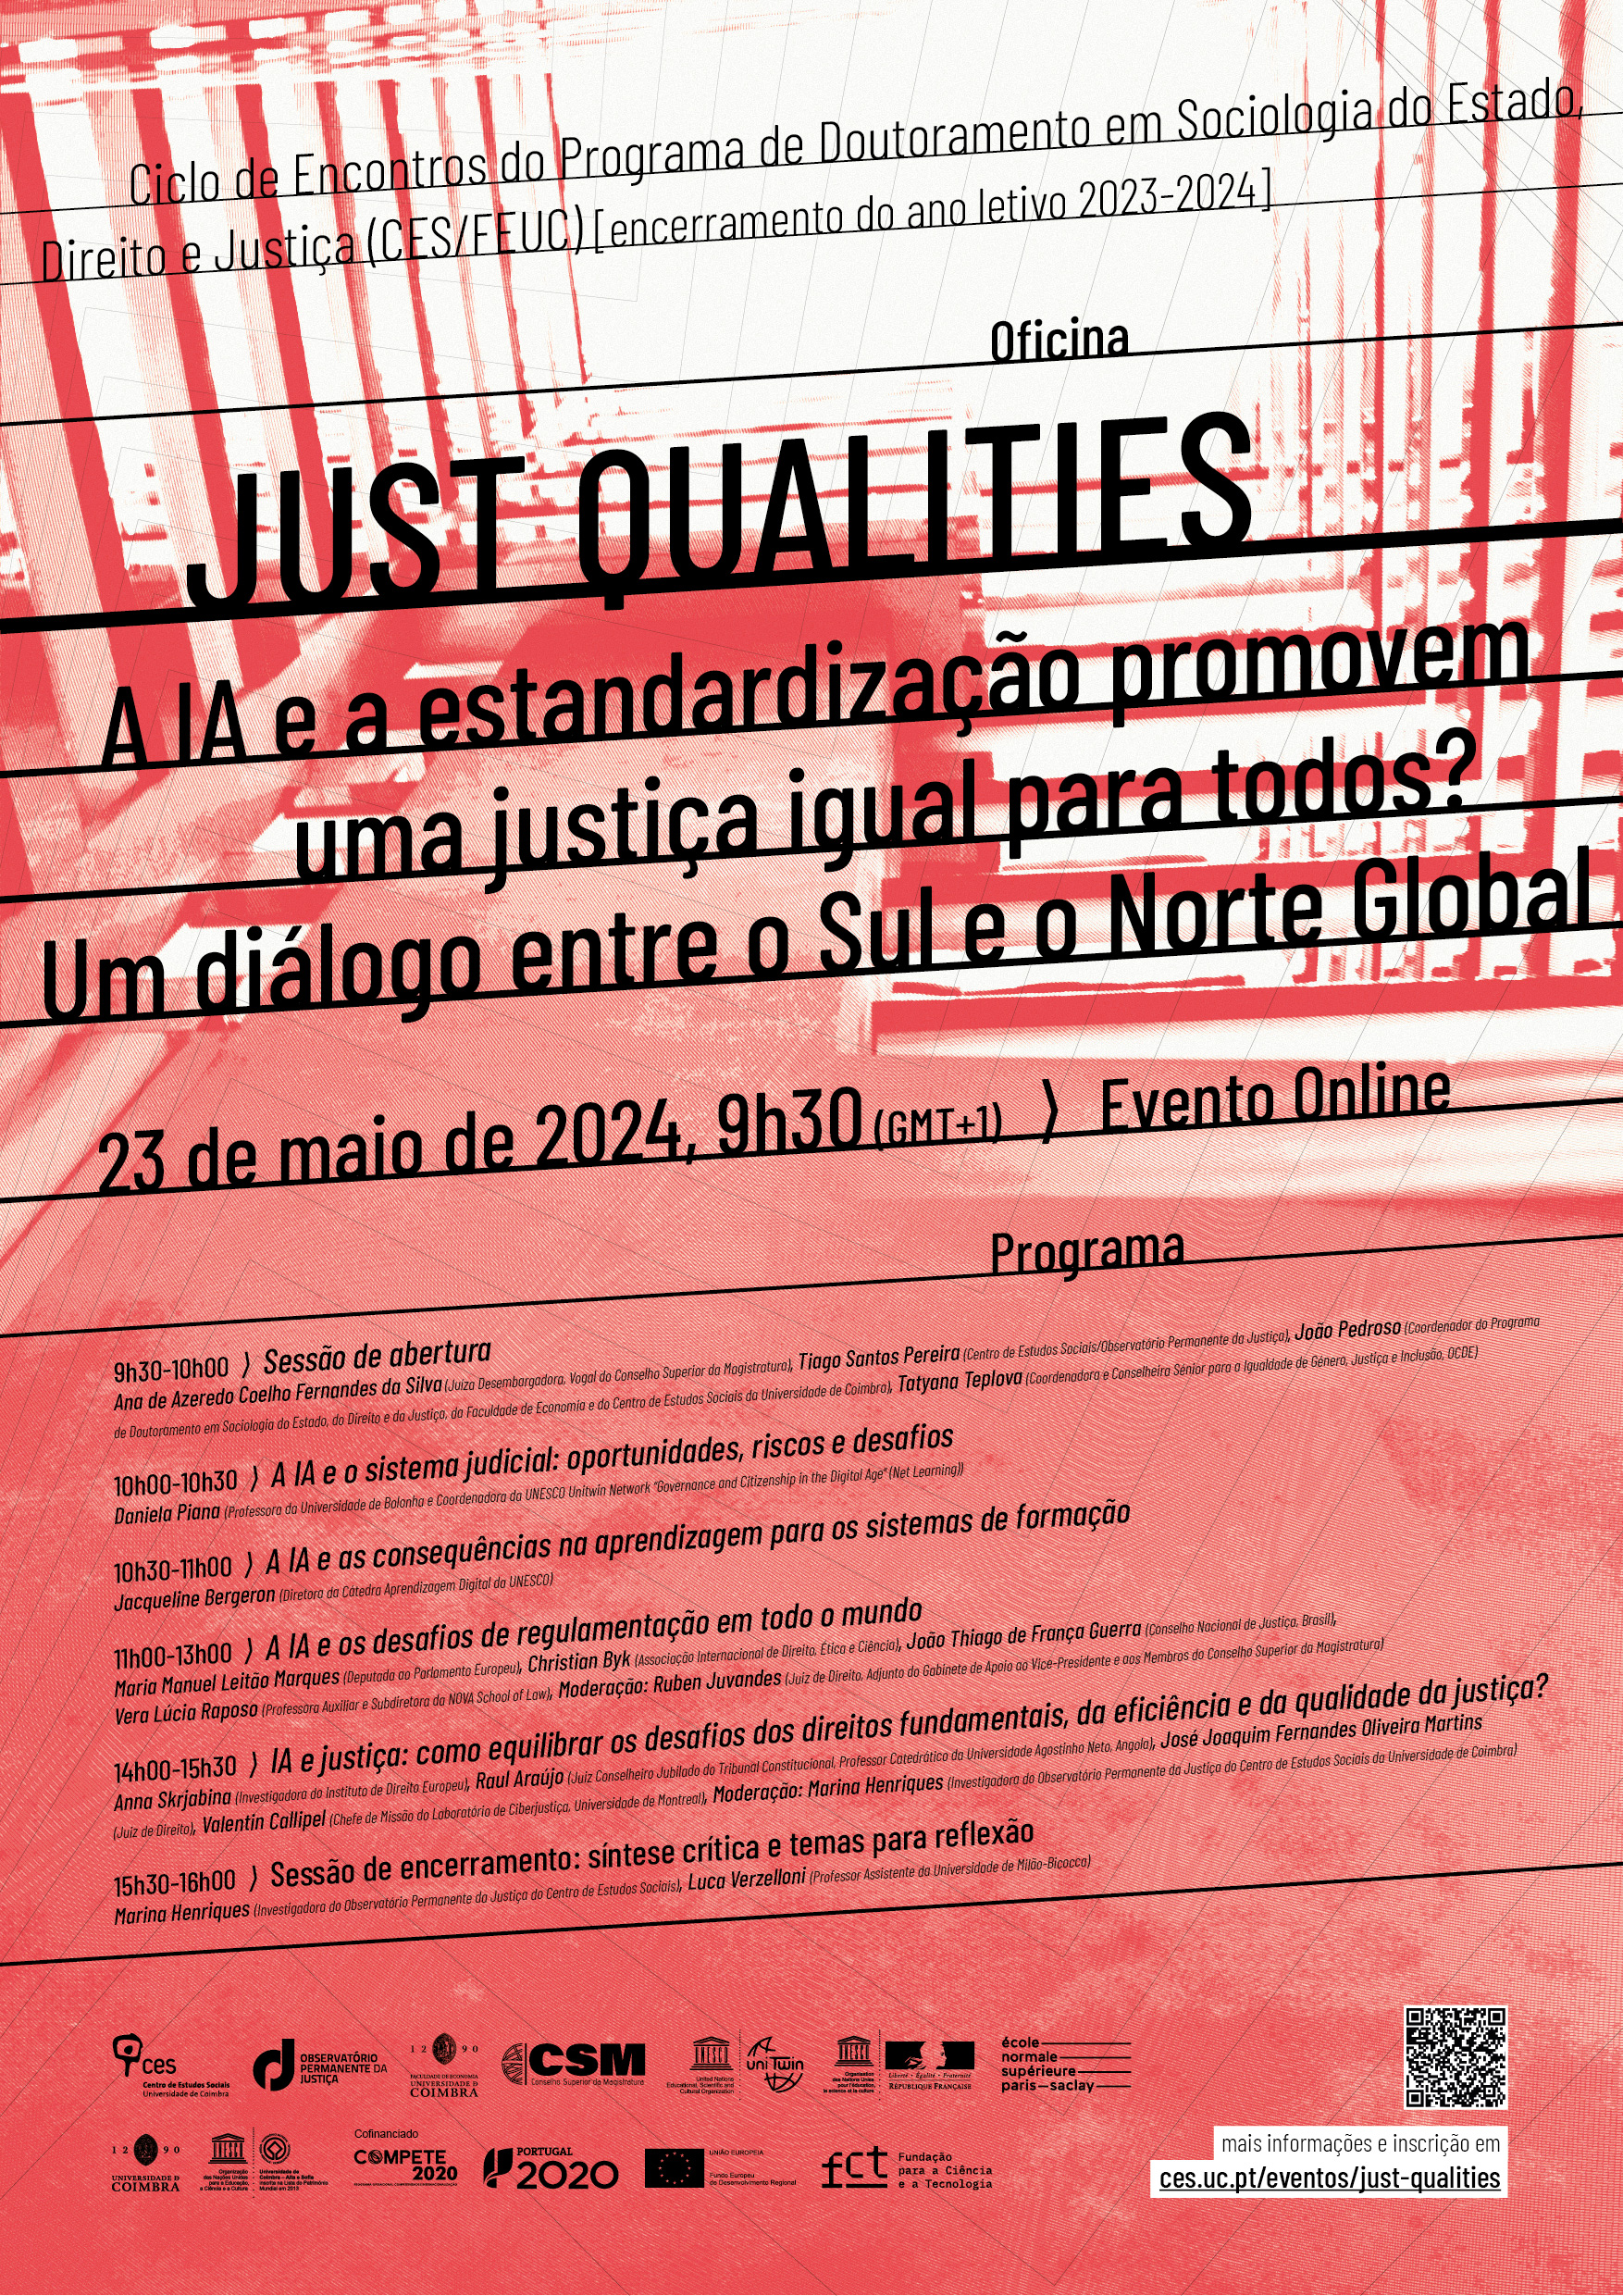 JUST QUALITIES - Do AI and standardization support an equal justice for all?  A two-way dialogue between the Global South and North<span id="edit_45832"><script>$(function() { $('#edit_45832').load( "/myces/user/editobj.php?tipo=evento&id=45832" ); });</script></span>